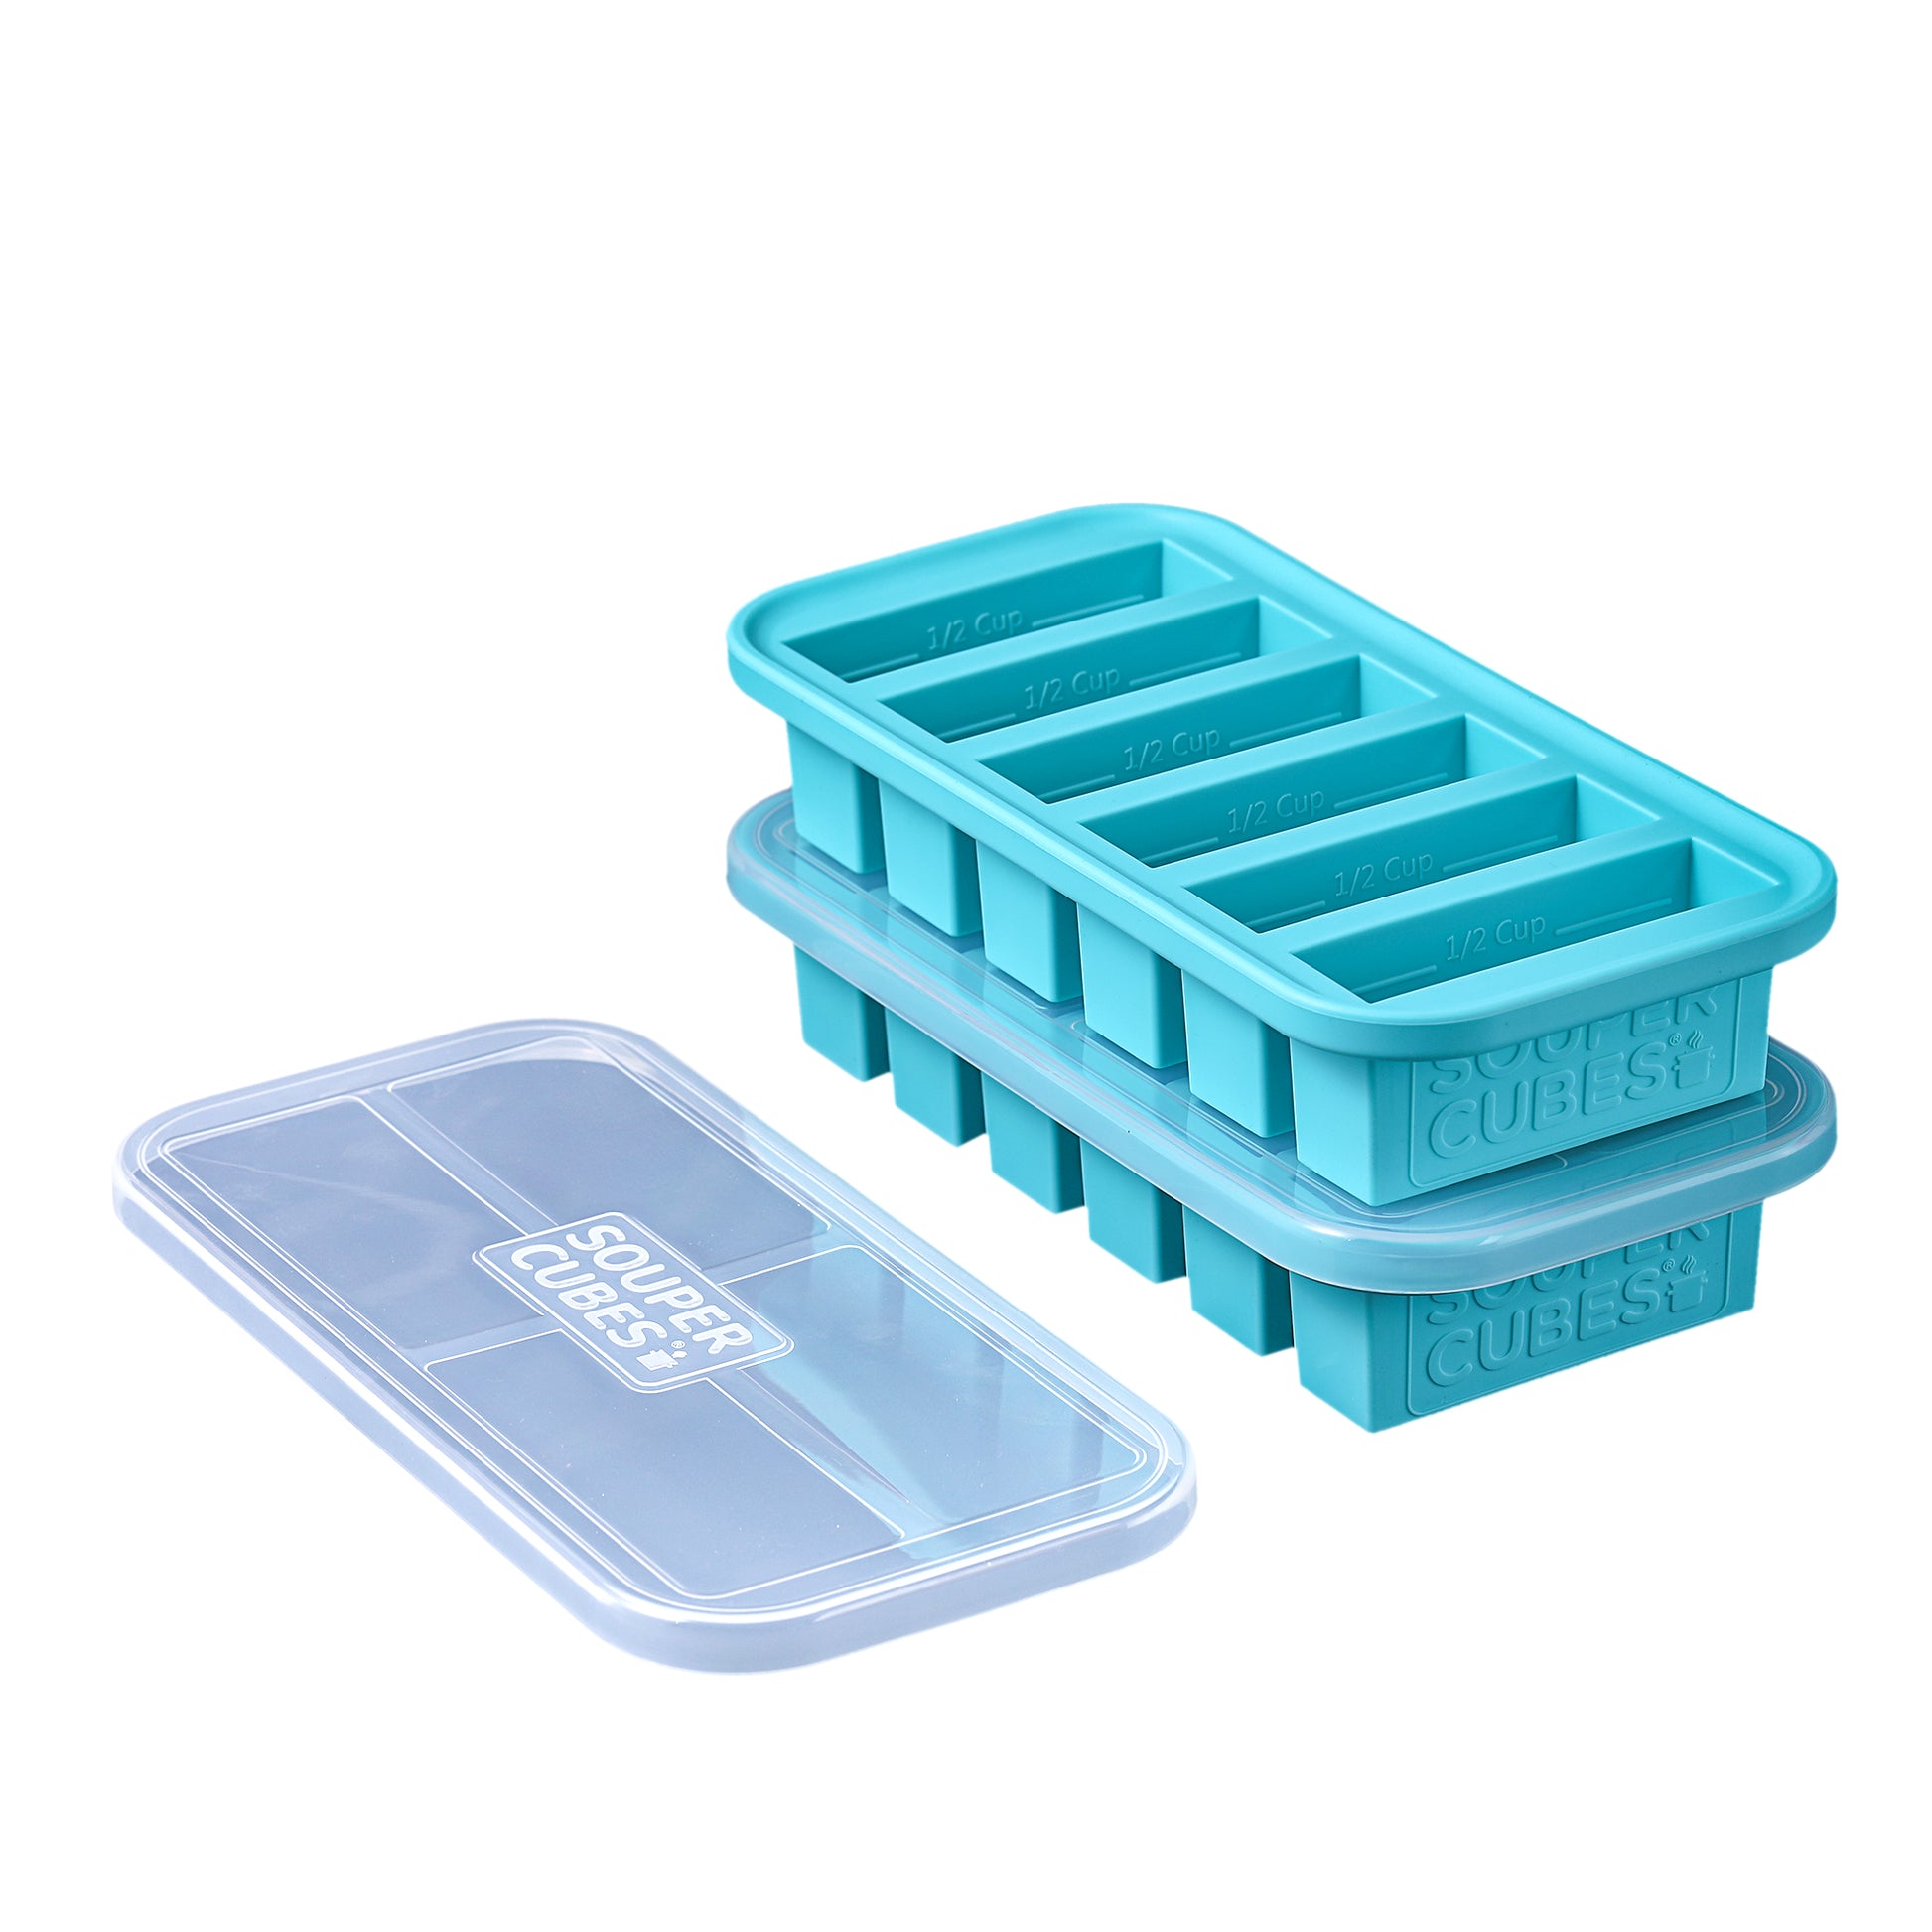 Home Ice Cream Freezer Storage Containers Set of 2 with Silicone